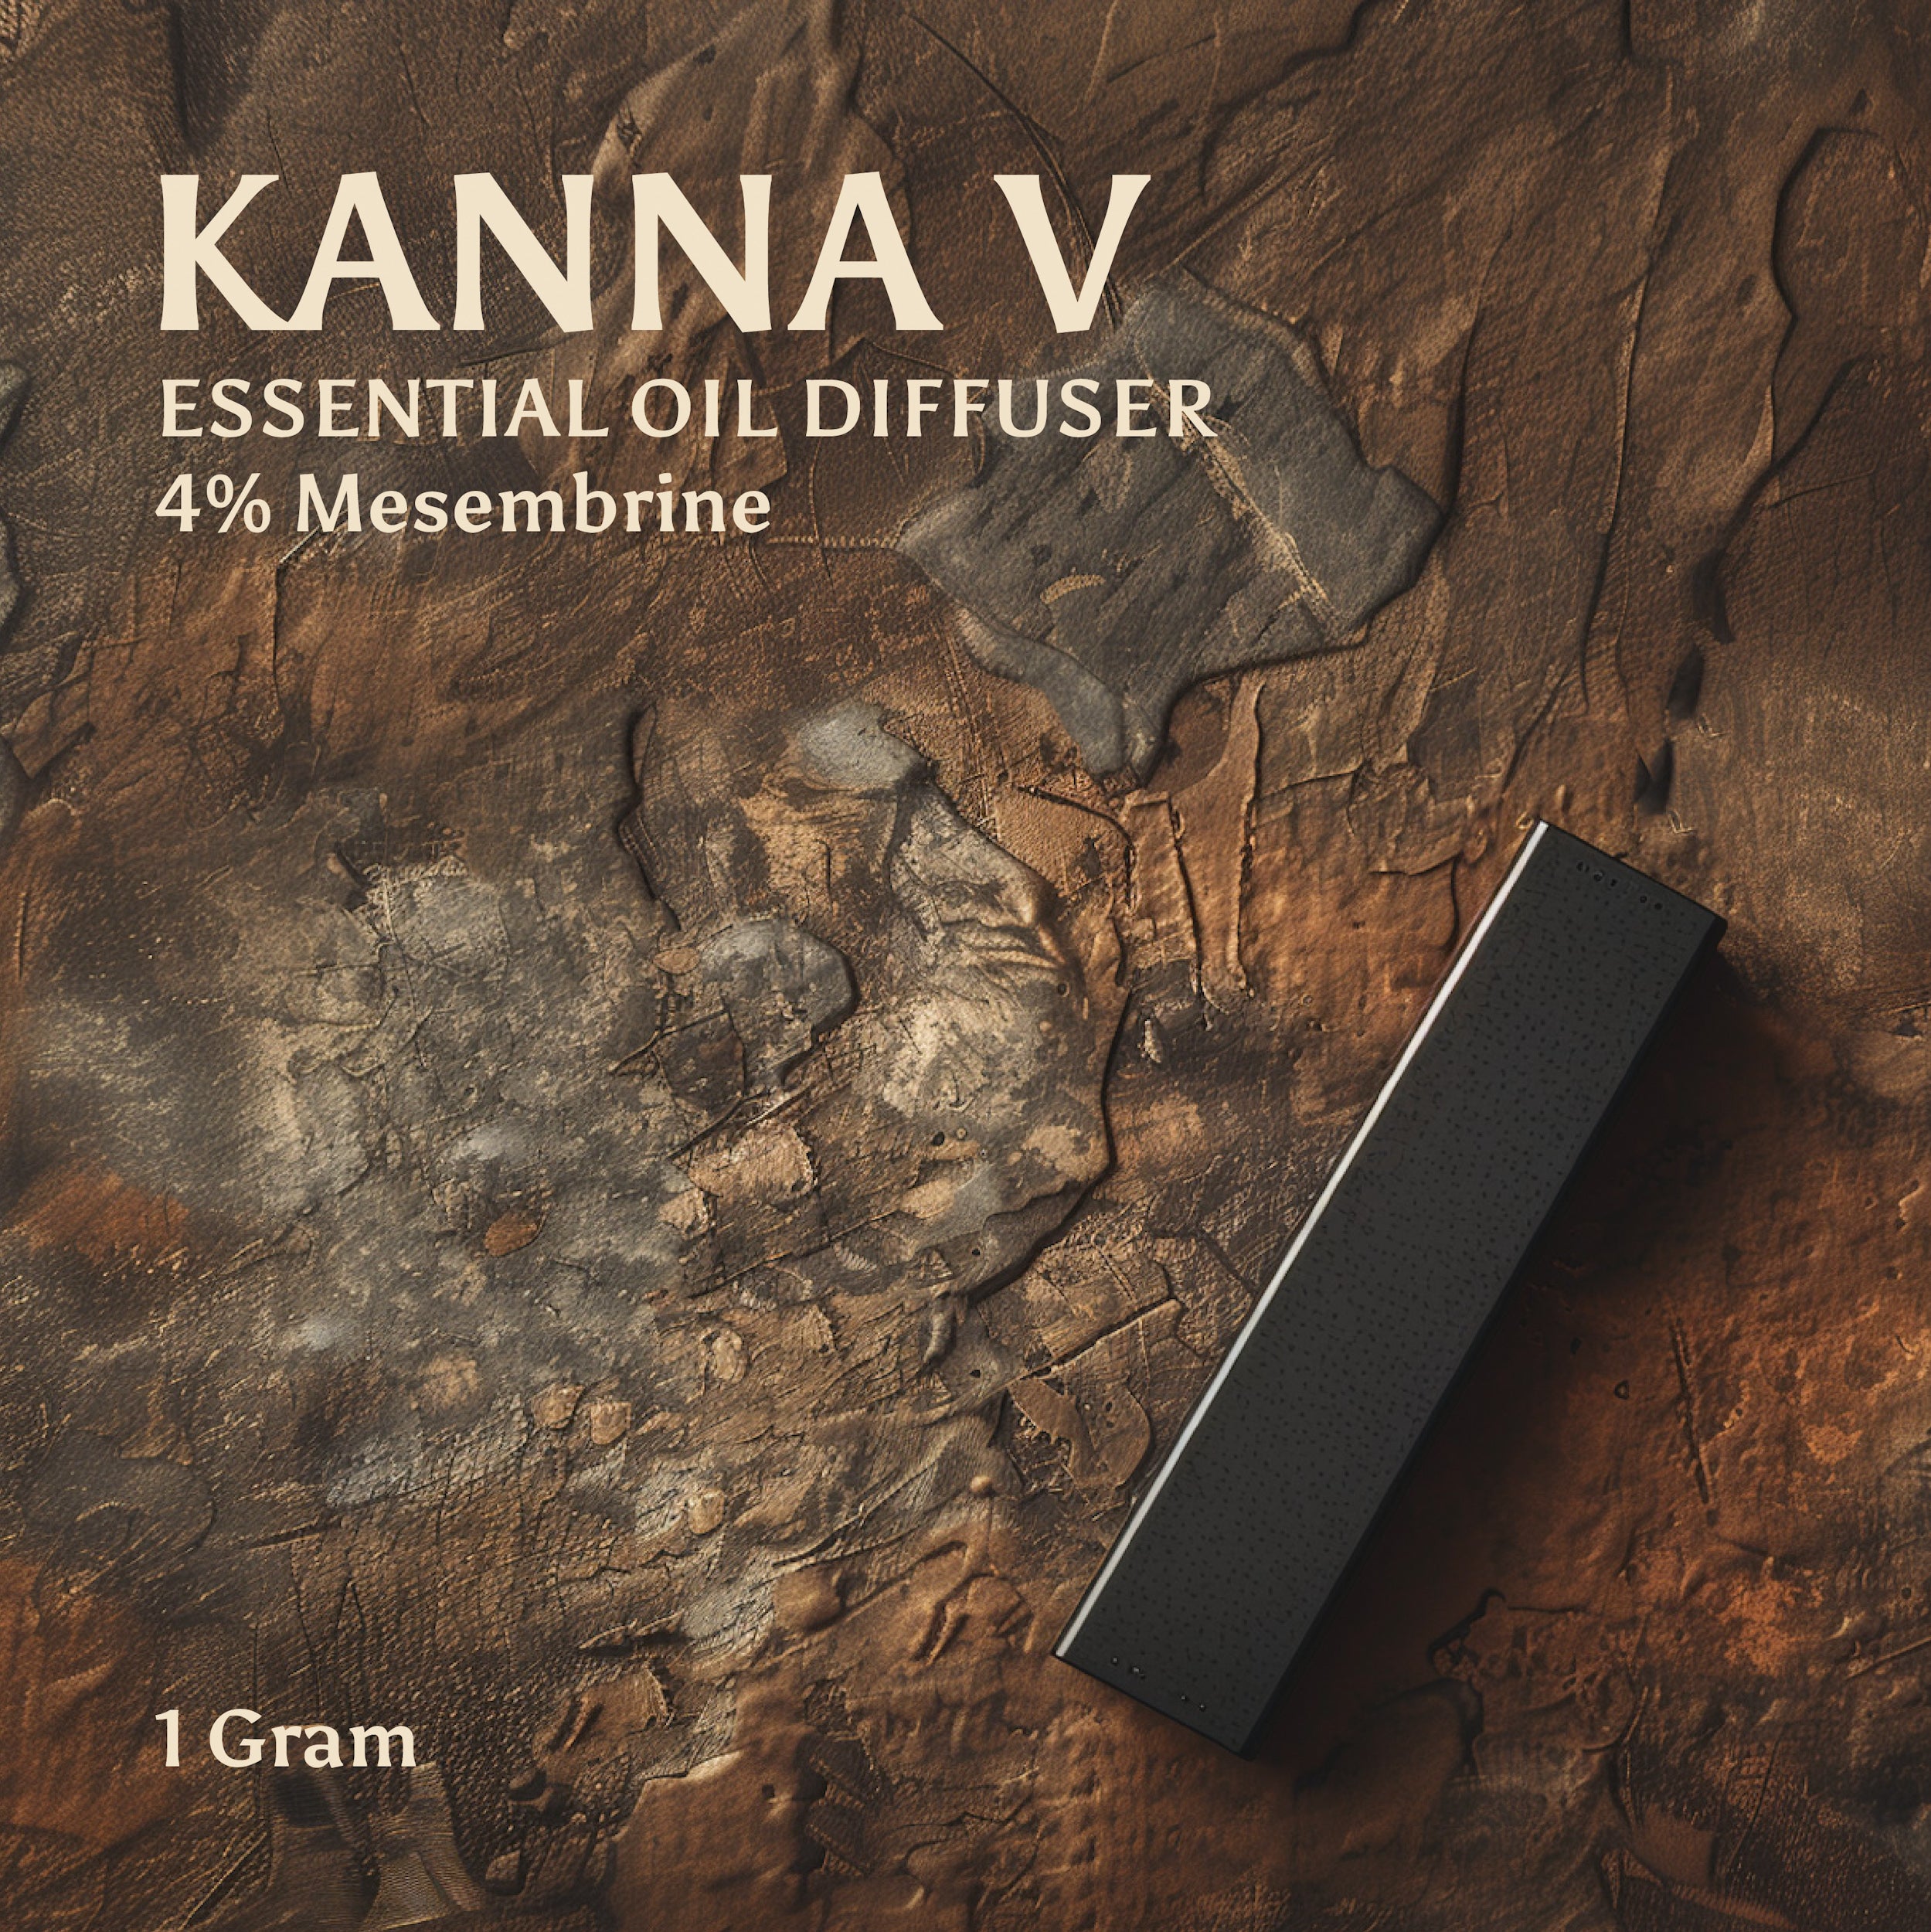 An Image of a kanna extract essential oil diffuser on an earth tone texture surface, made by kanna extract company with organic sceletium tortuosum for sale with bulk kanna sale options as well as wholesale discounts